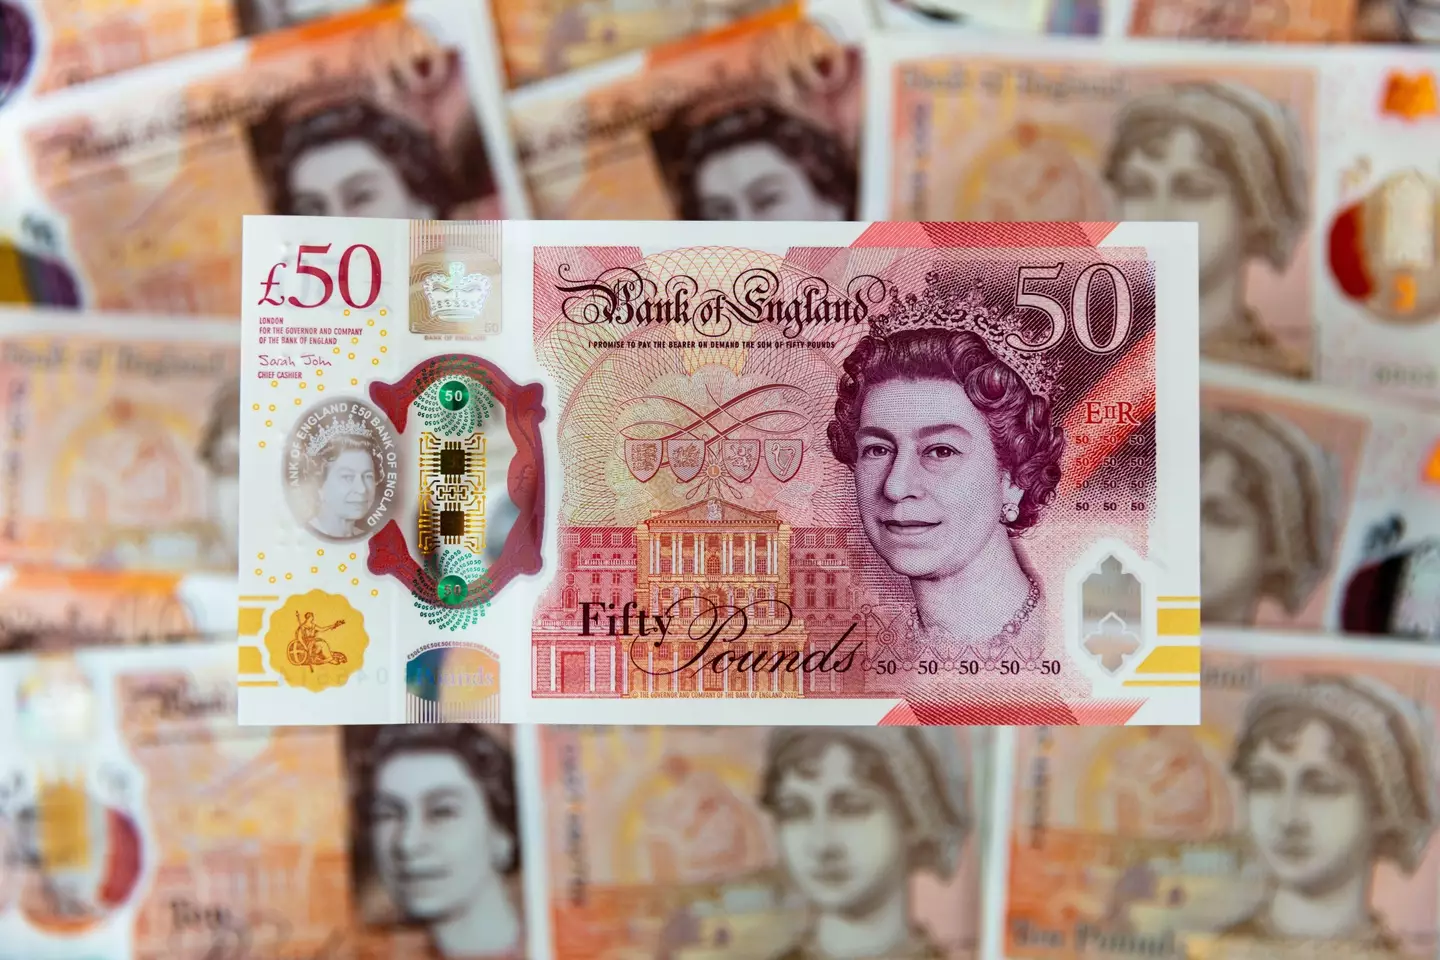 Most Brits don't really use £50 notes.